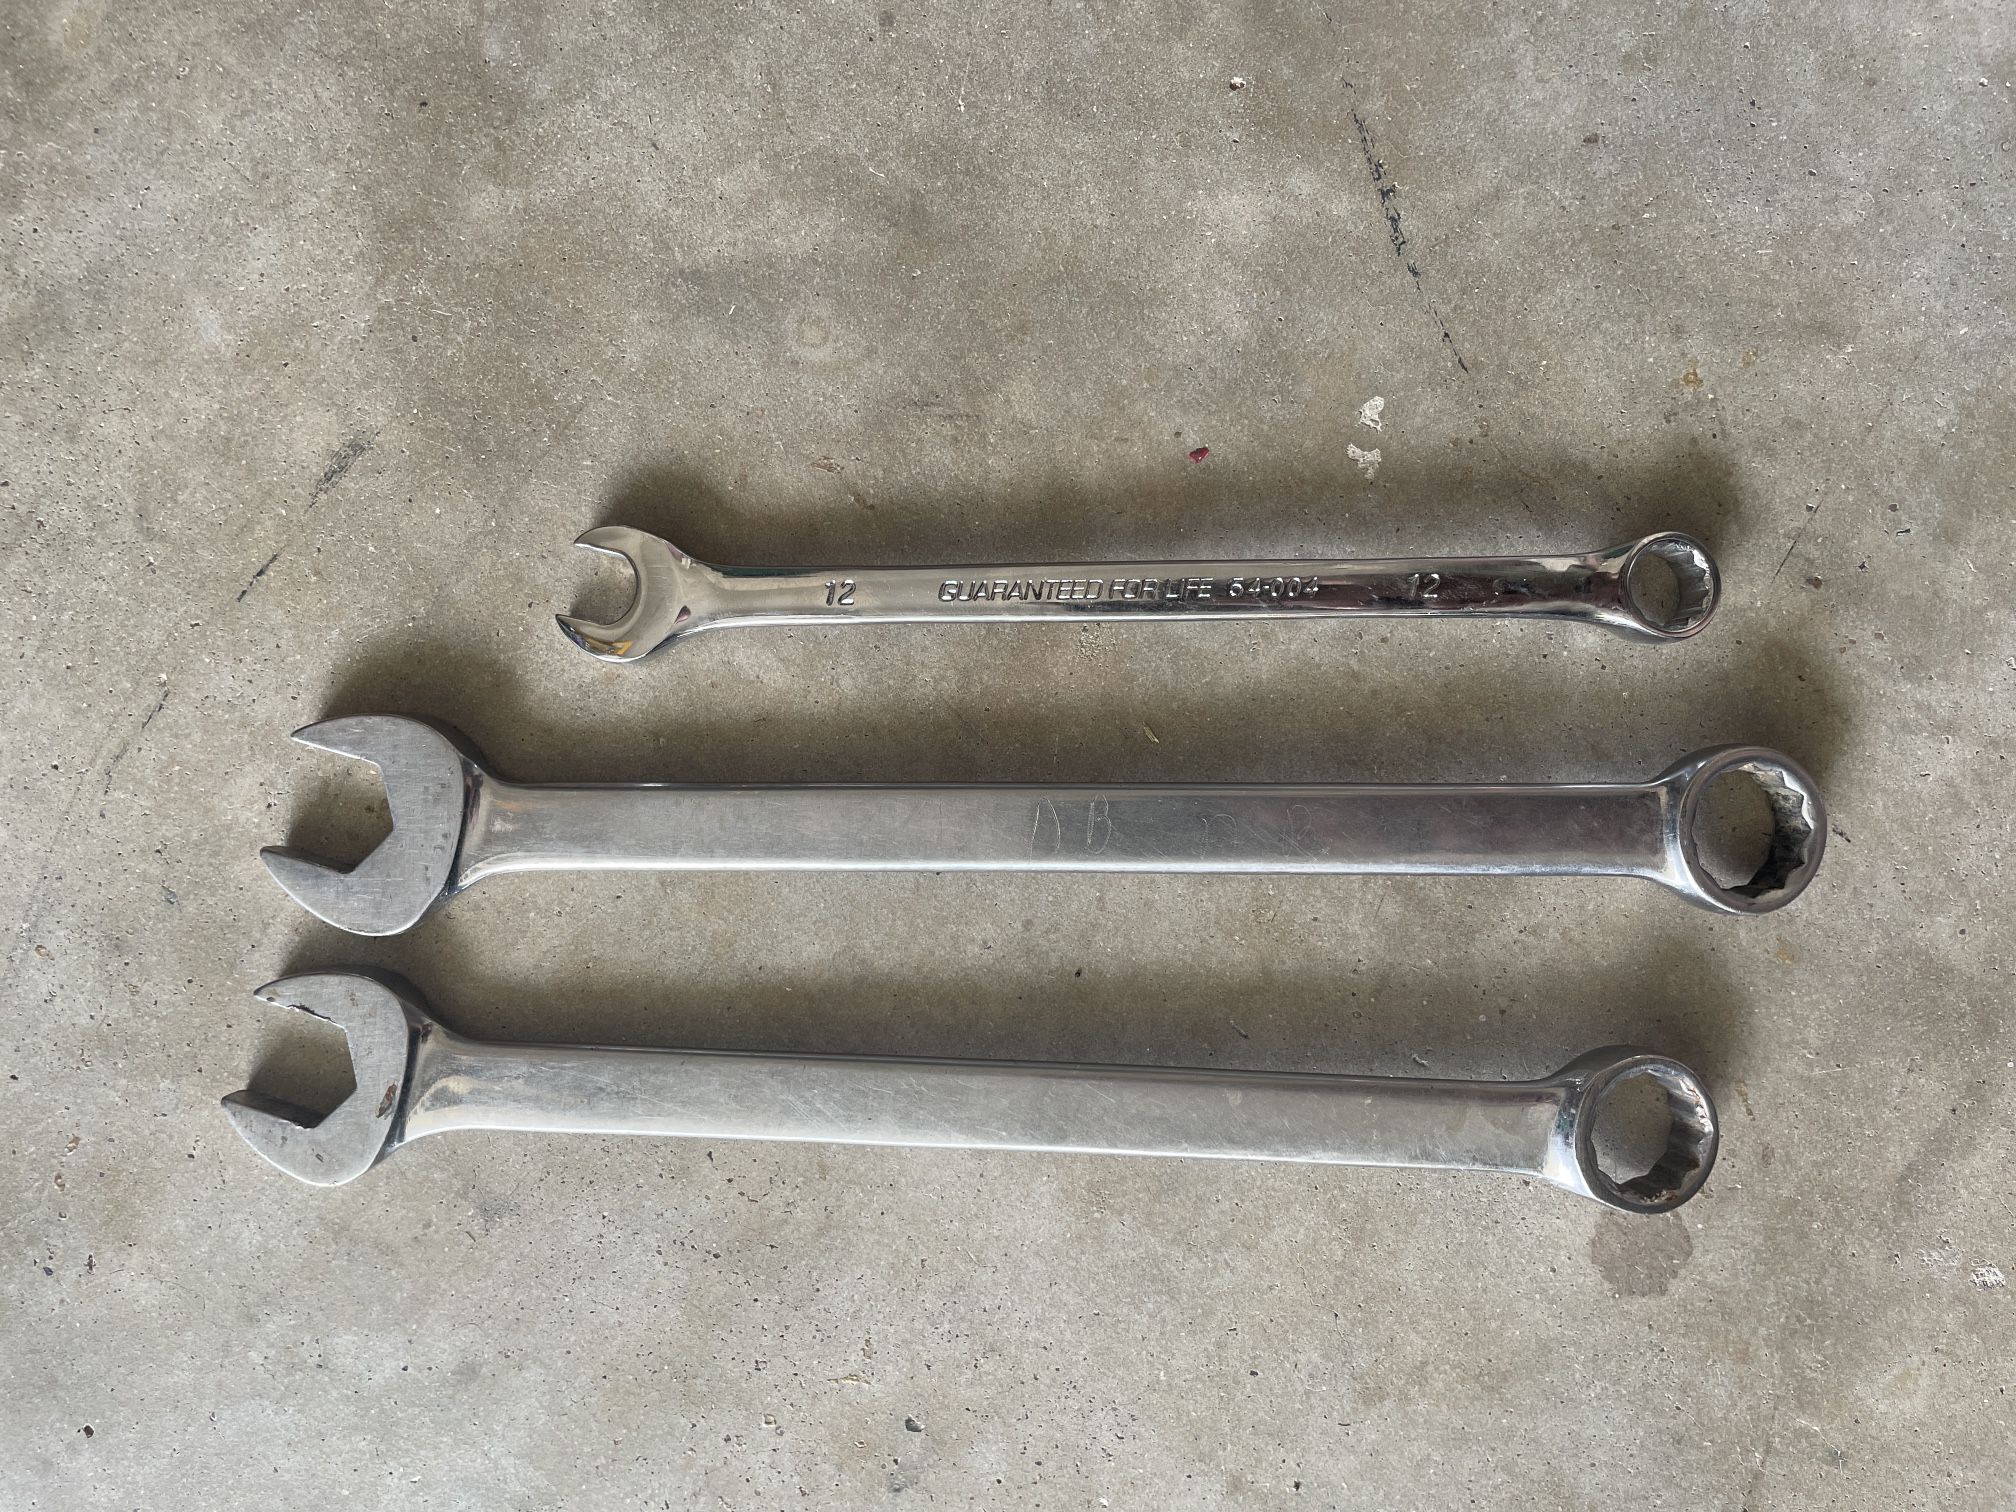 Matco wrenches 18mm, 19mm.  Duralast 12mm.